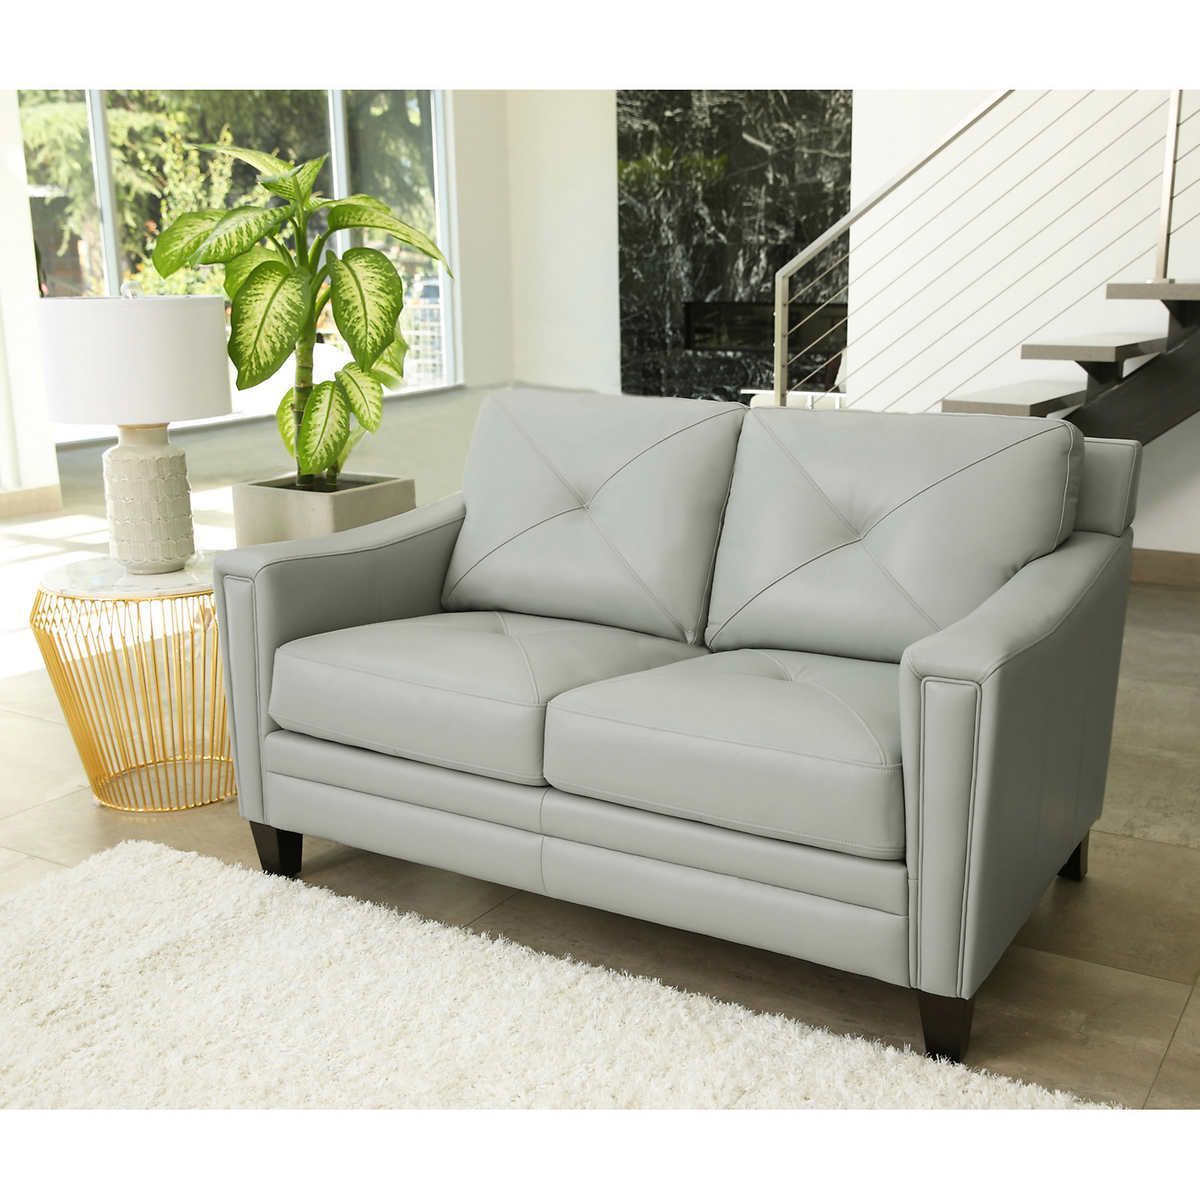 Pinprecious Joy On Livingroom | Top Grain Leather Sofa Inside Bloutop Upholstered Sectional Sofas (View 12 of 15)